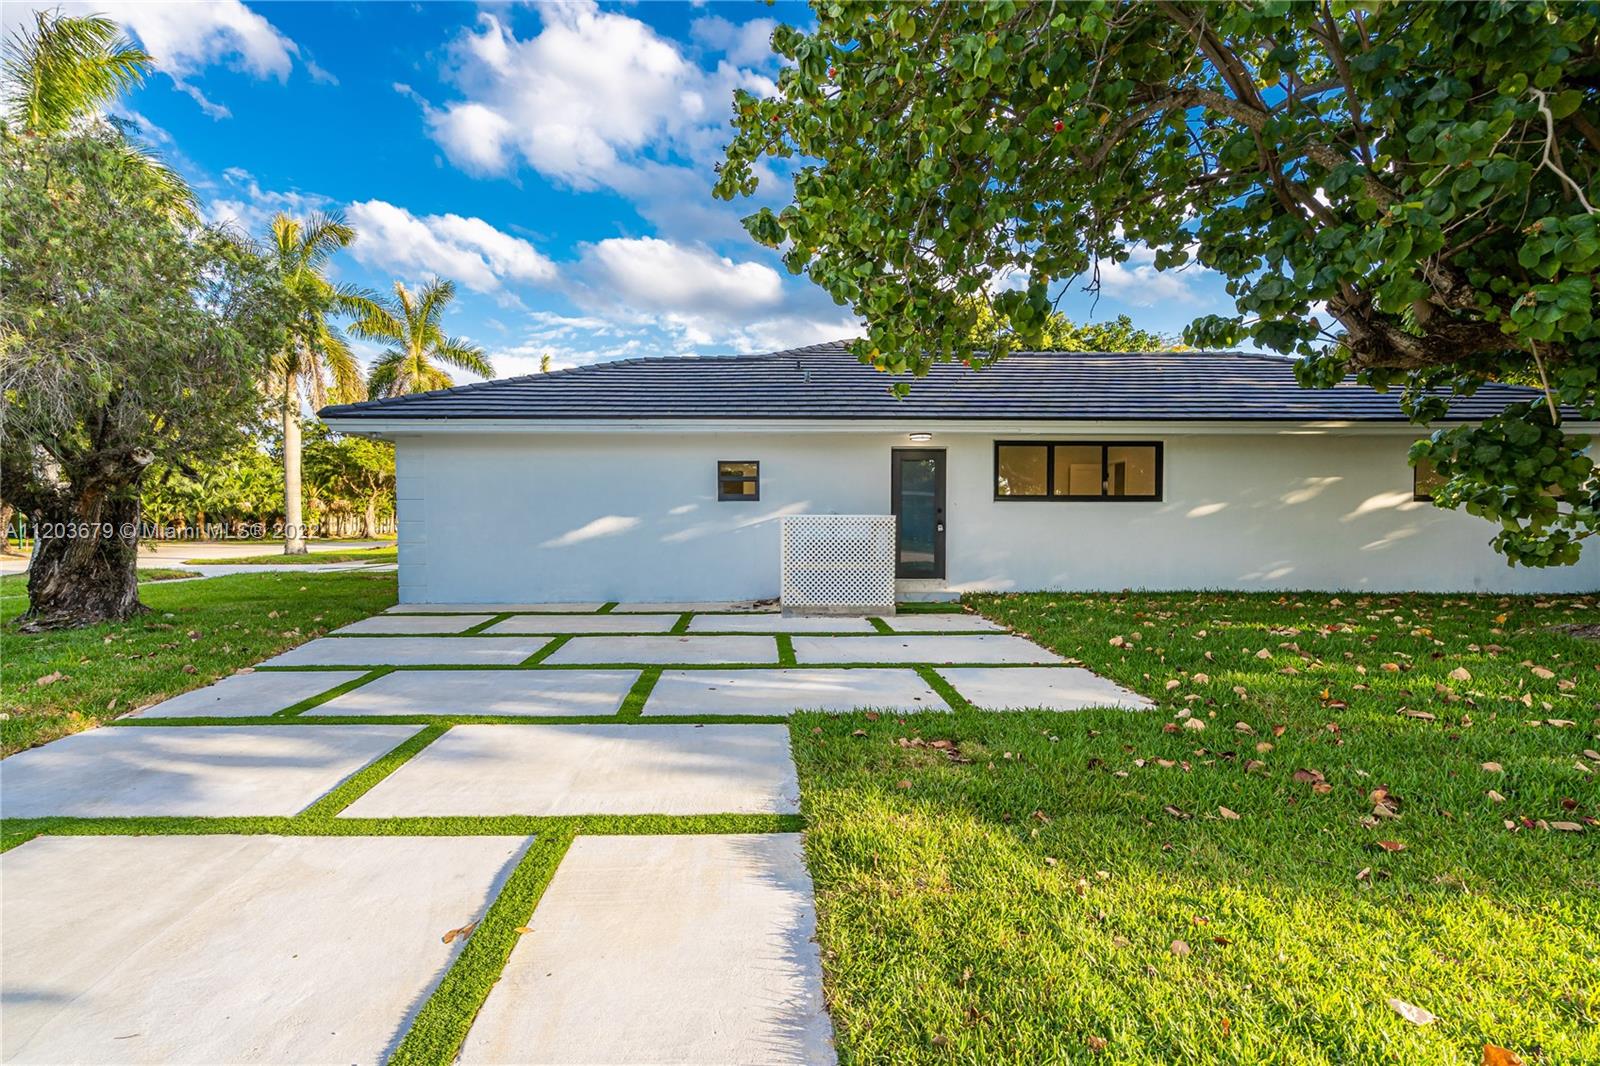 11600 SW 72nd Ave, Pinecrest, Florida 33156, 5 Bedrooms Bedrooms, ,3 BathroomsBathrooms,Residential,For Sale,11600 SW 72nd Ave,A11203679